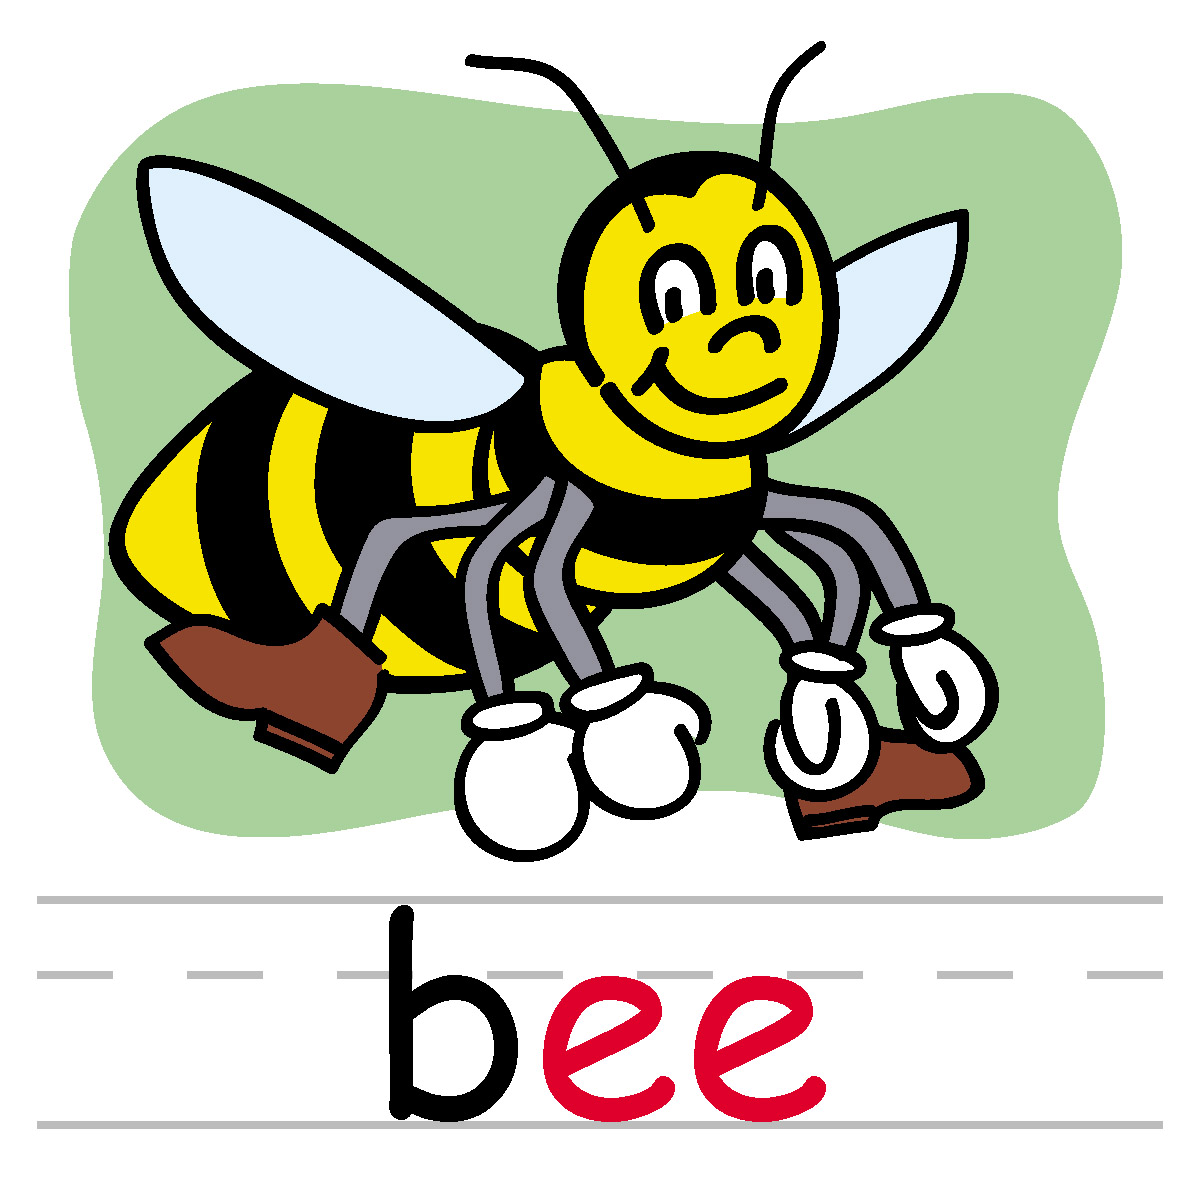 Spelling bee clipart free download clip art on 3